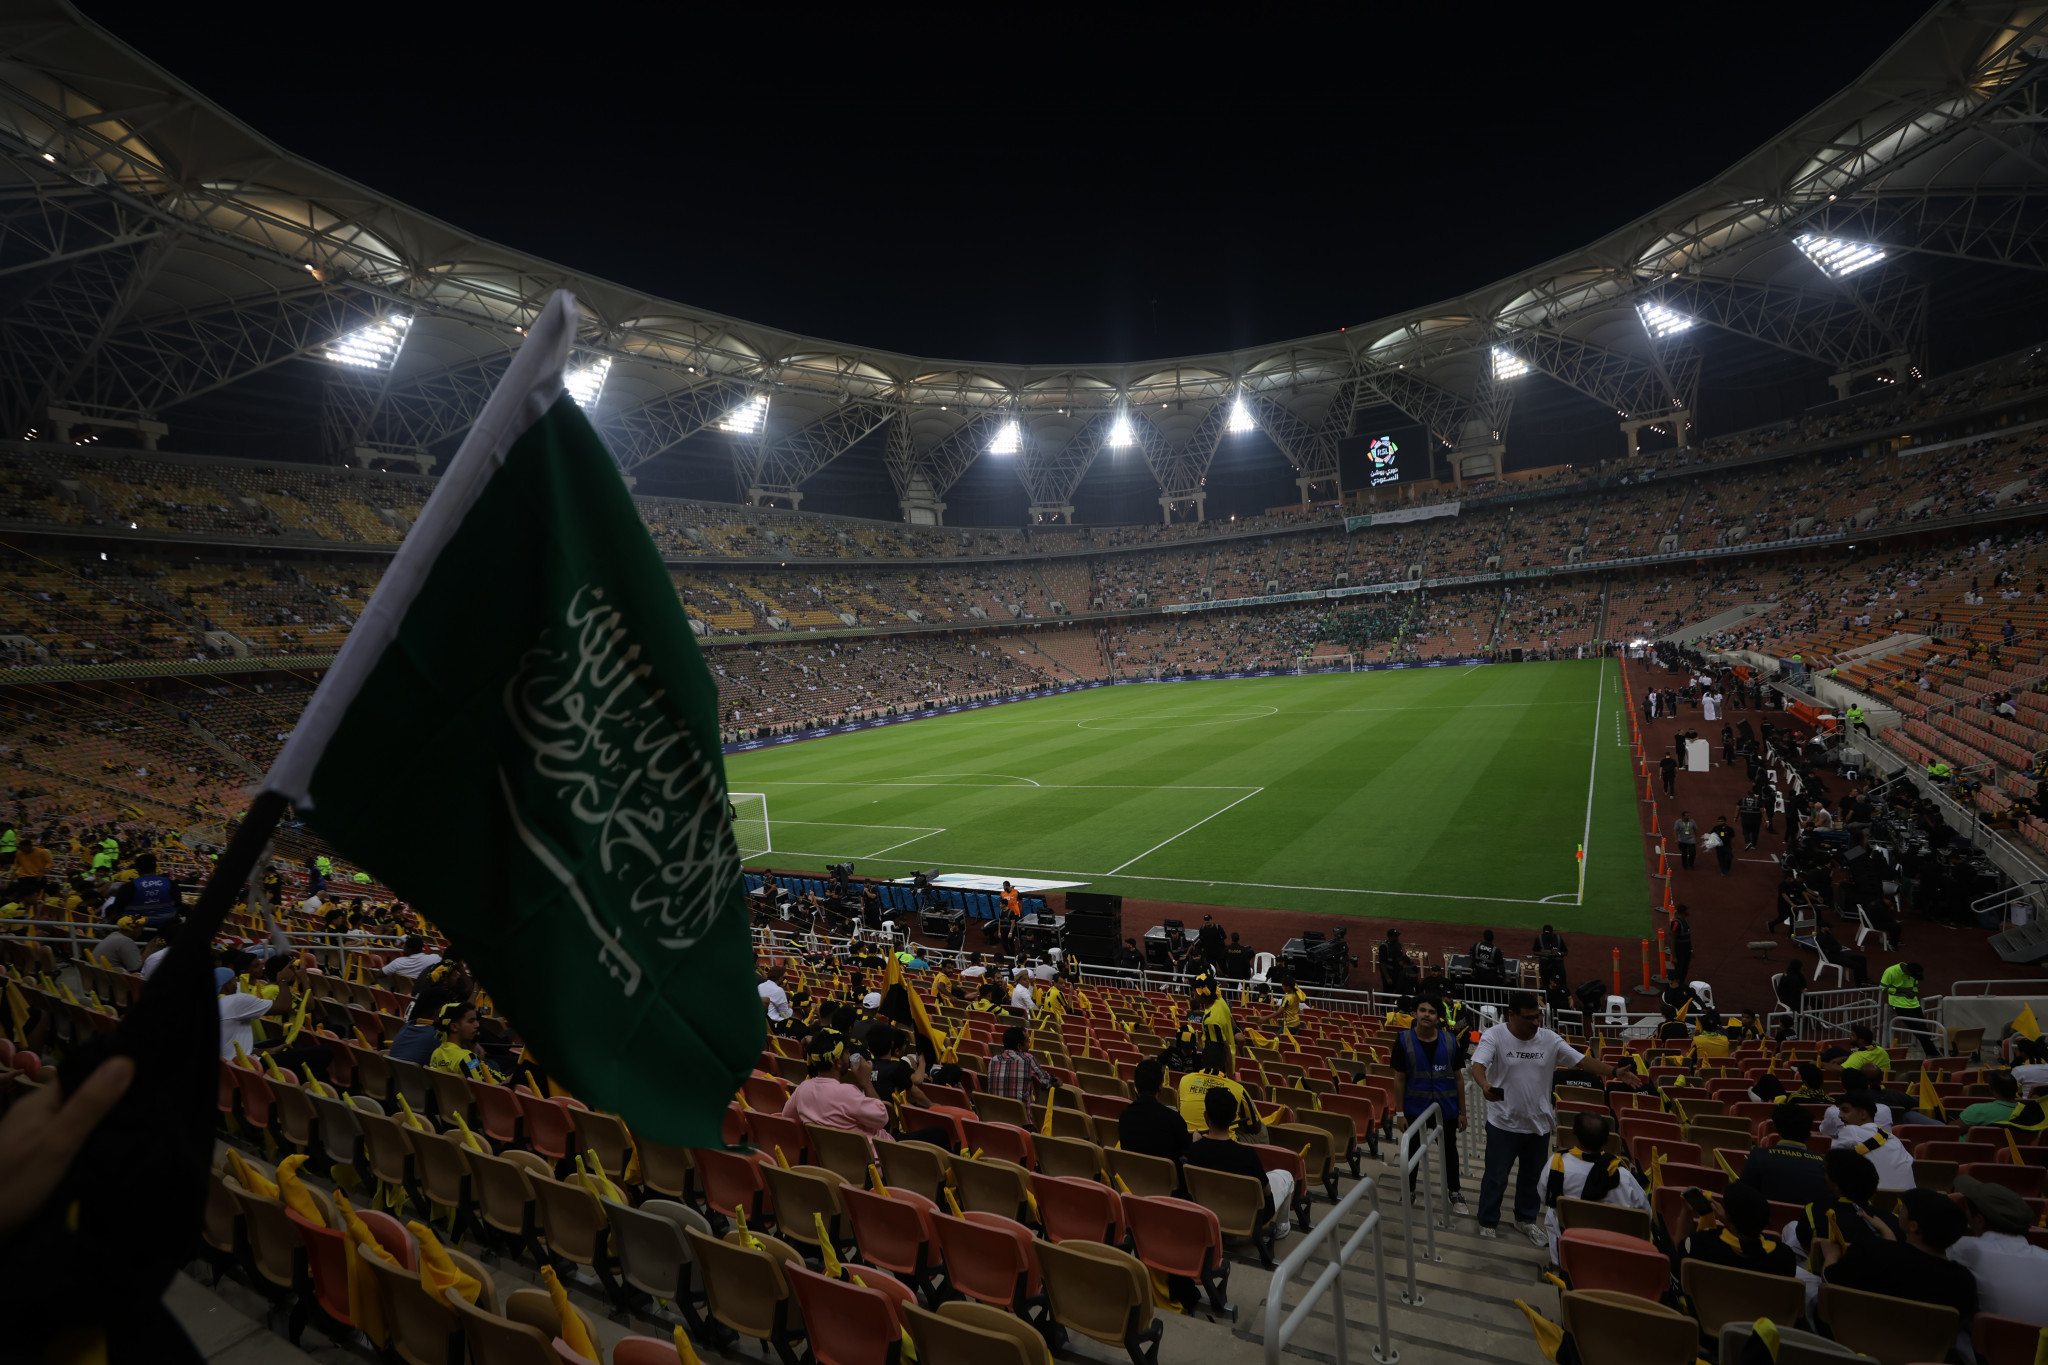 Saudi Arabia is considered the firm favourite to host the 2034 FIFA World Cup, although this would prove highly controversial  ©Getty Images